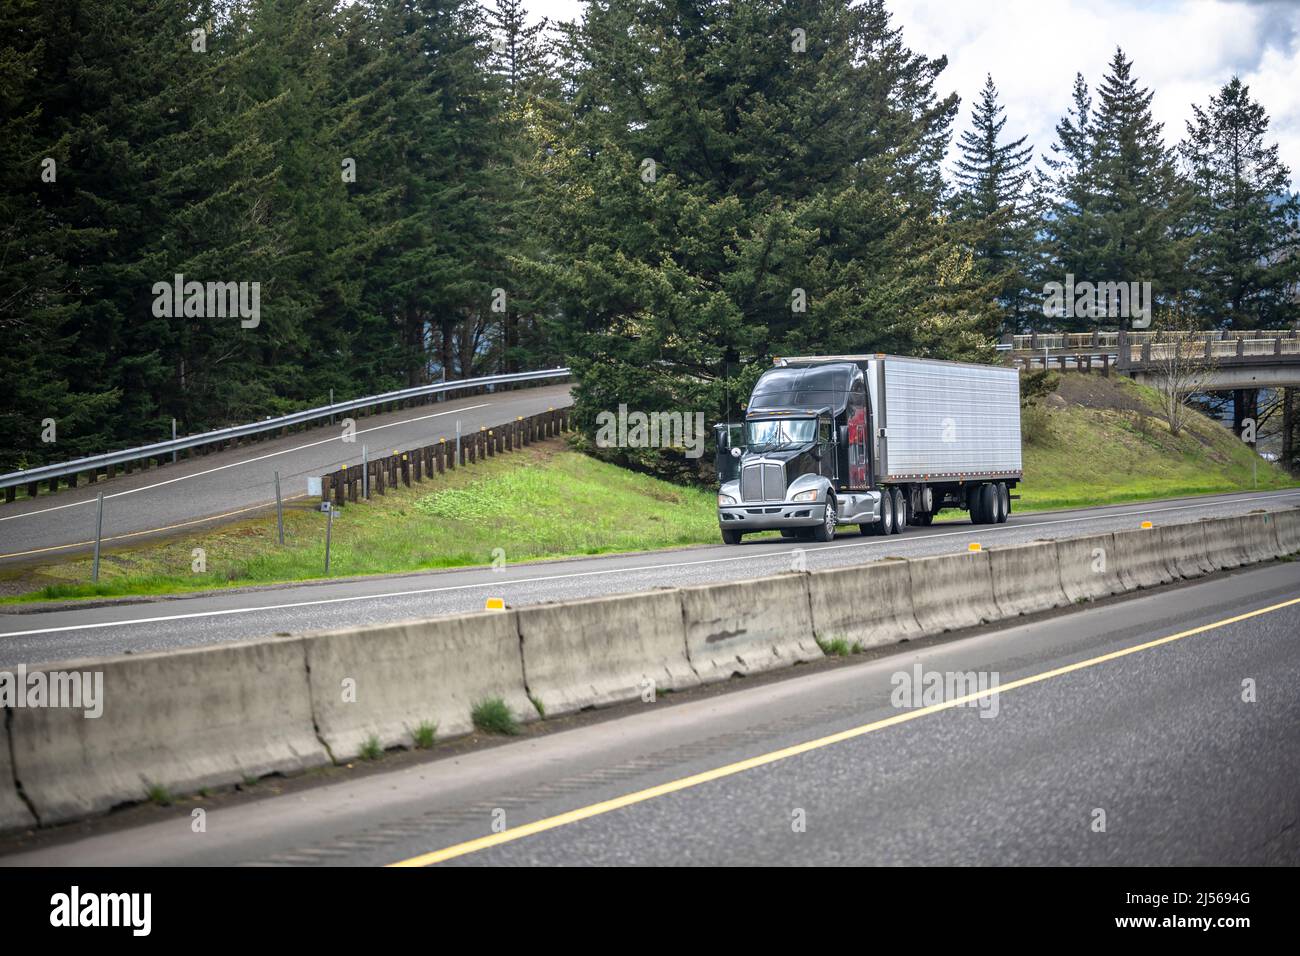 Popular industrial standard big rig black semi truck tractor with loaded refrigerator semi trailer standing  out of service on highway road shoulder w Stock Photo